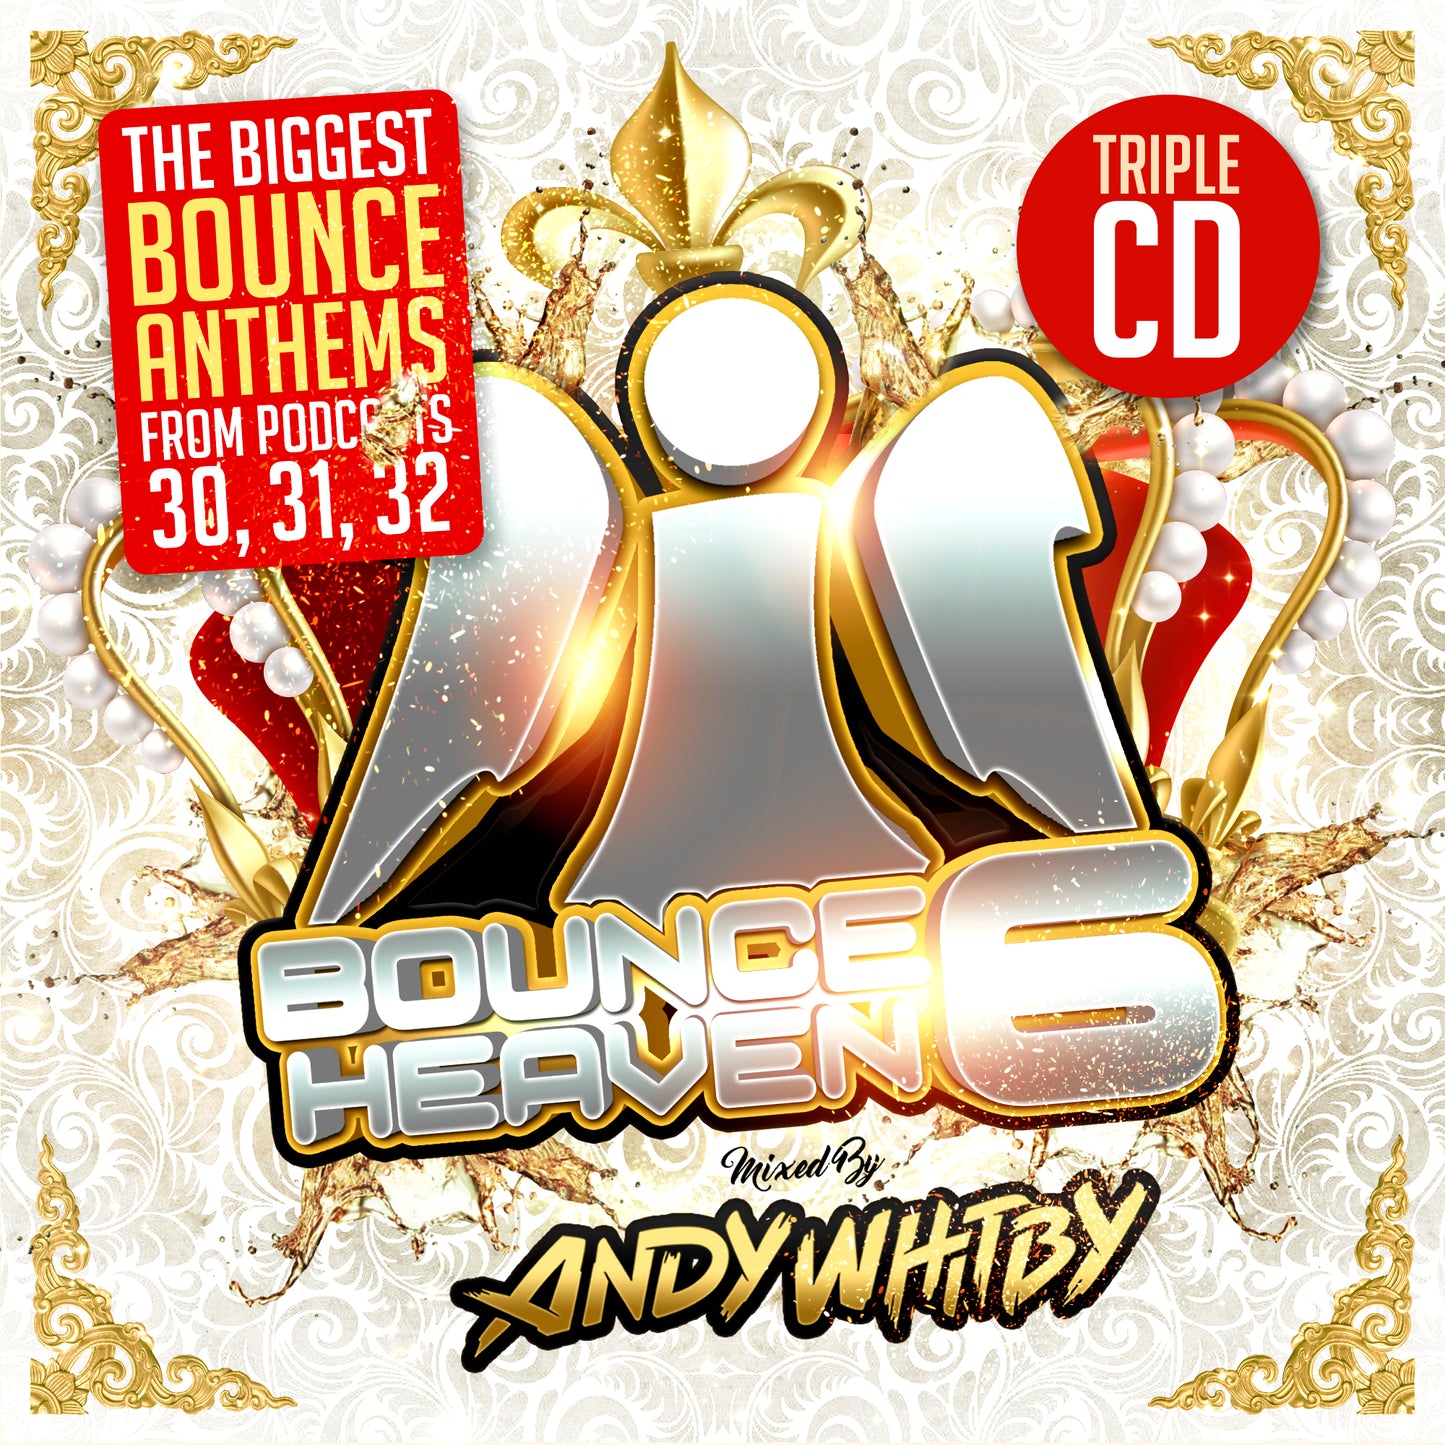 Bounce Heaven 6 mixed by Andy Whitby (3CD)